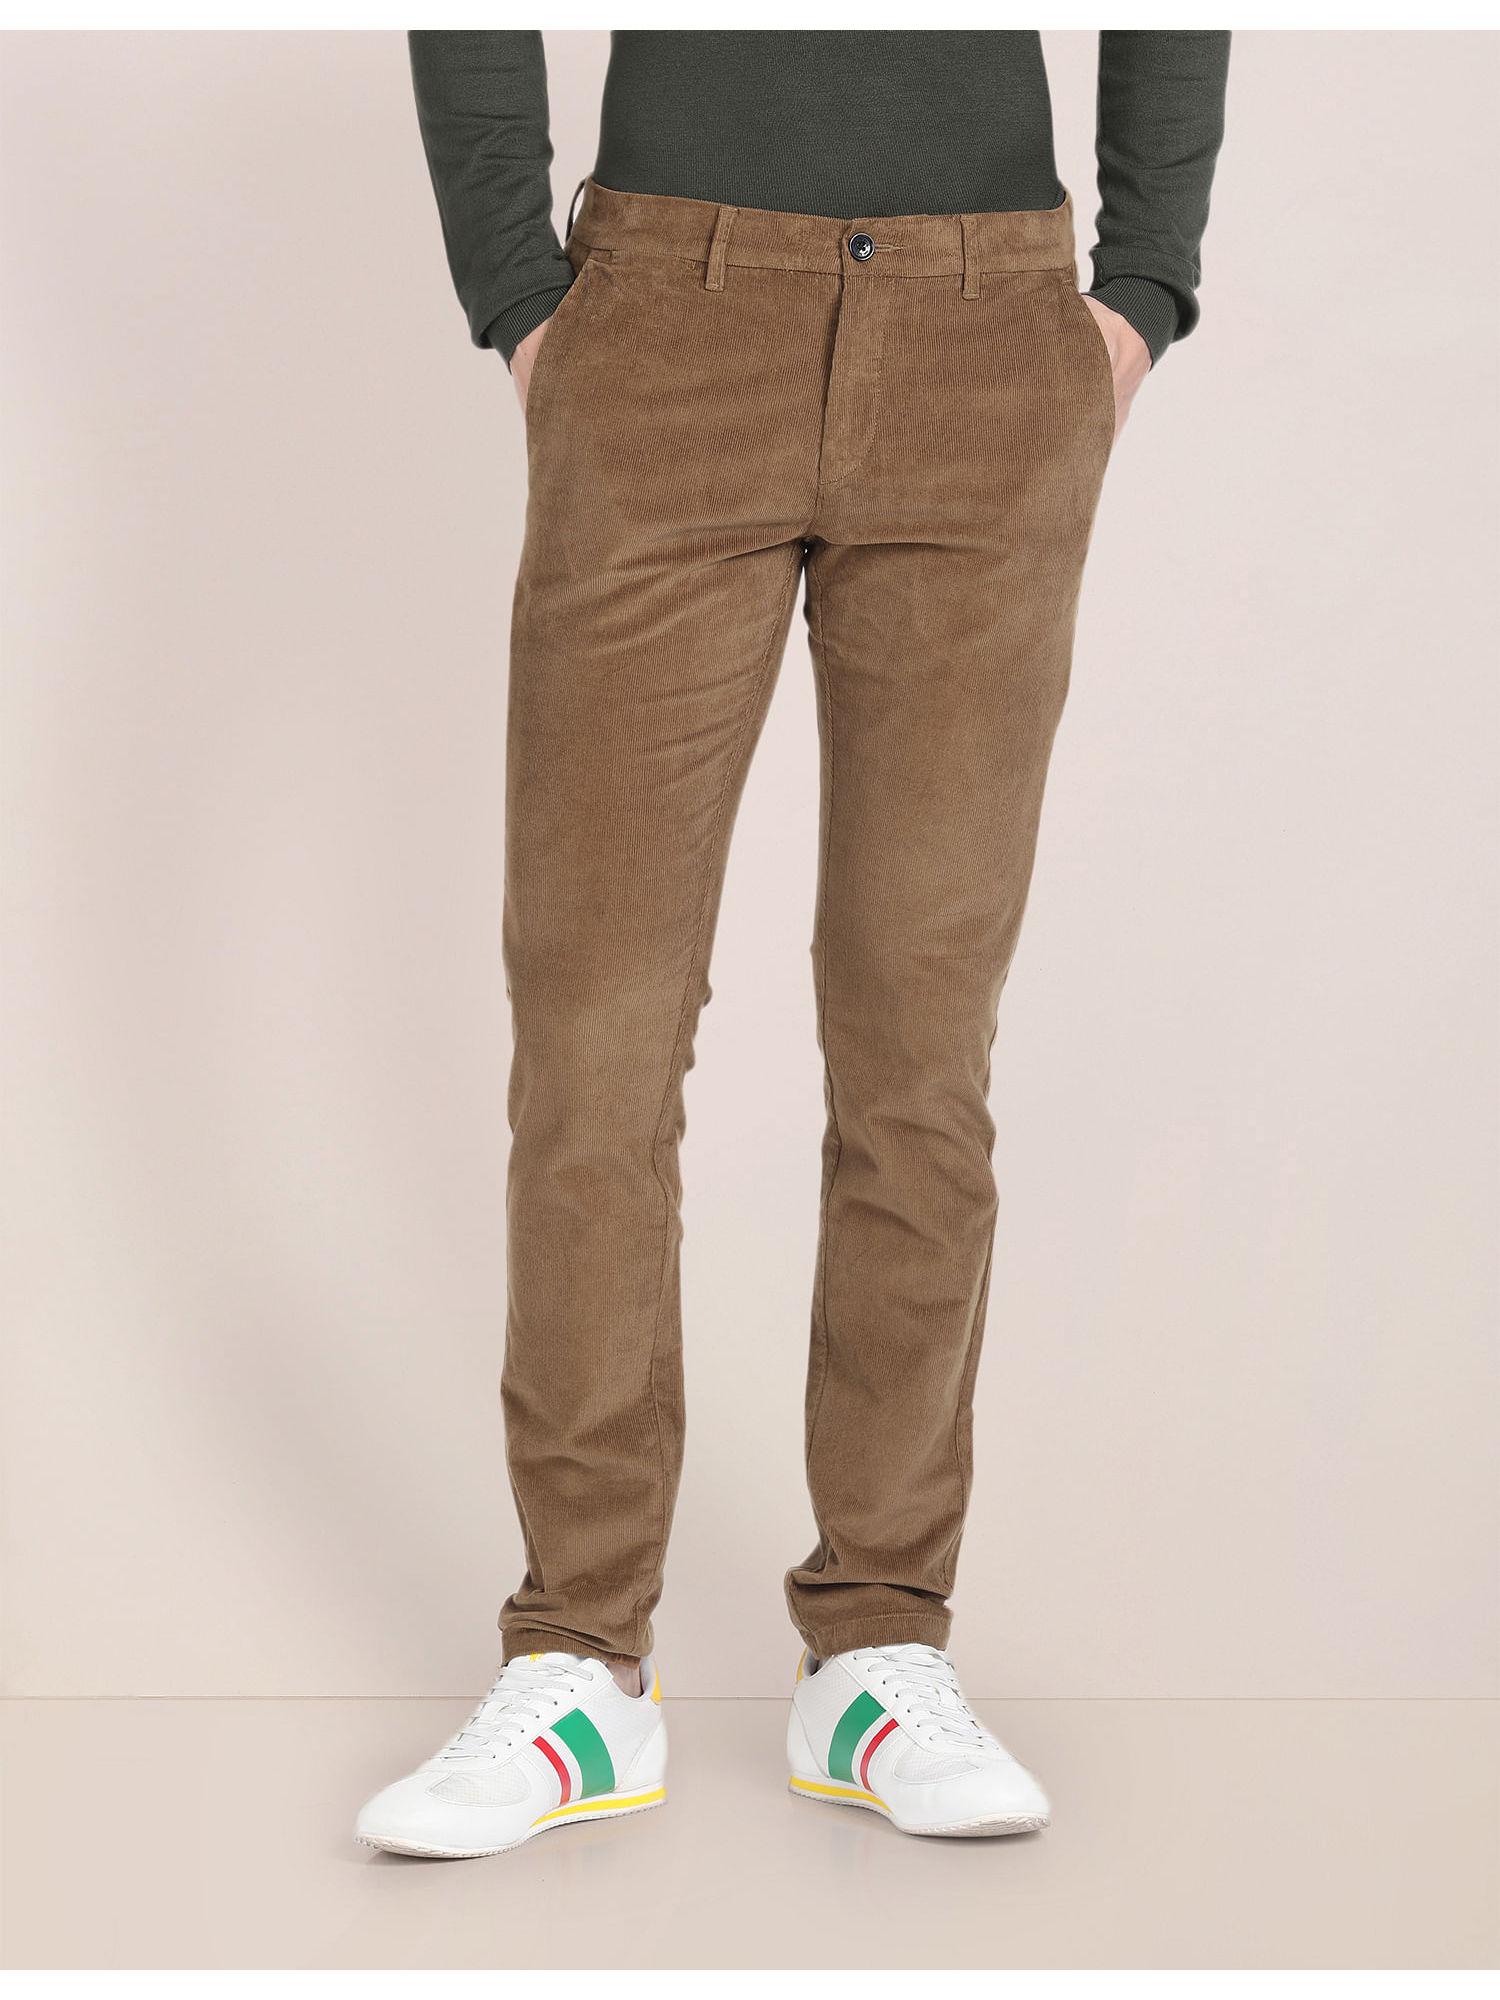 brown cotton stretch corduroy casual trousers